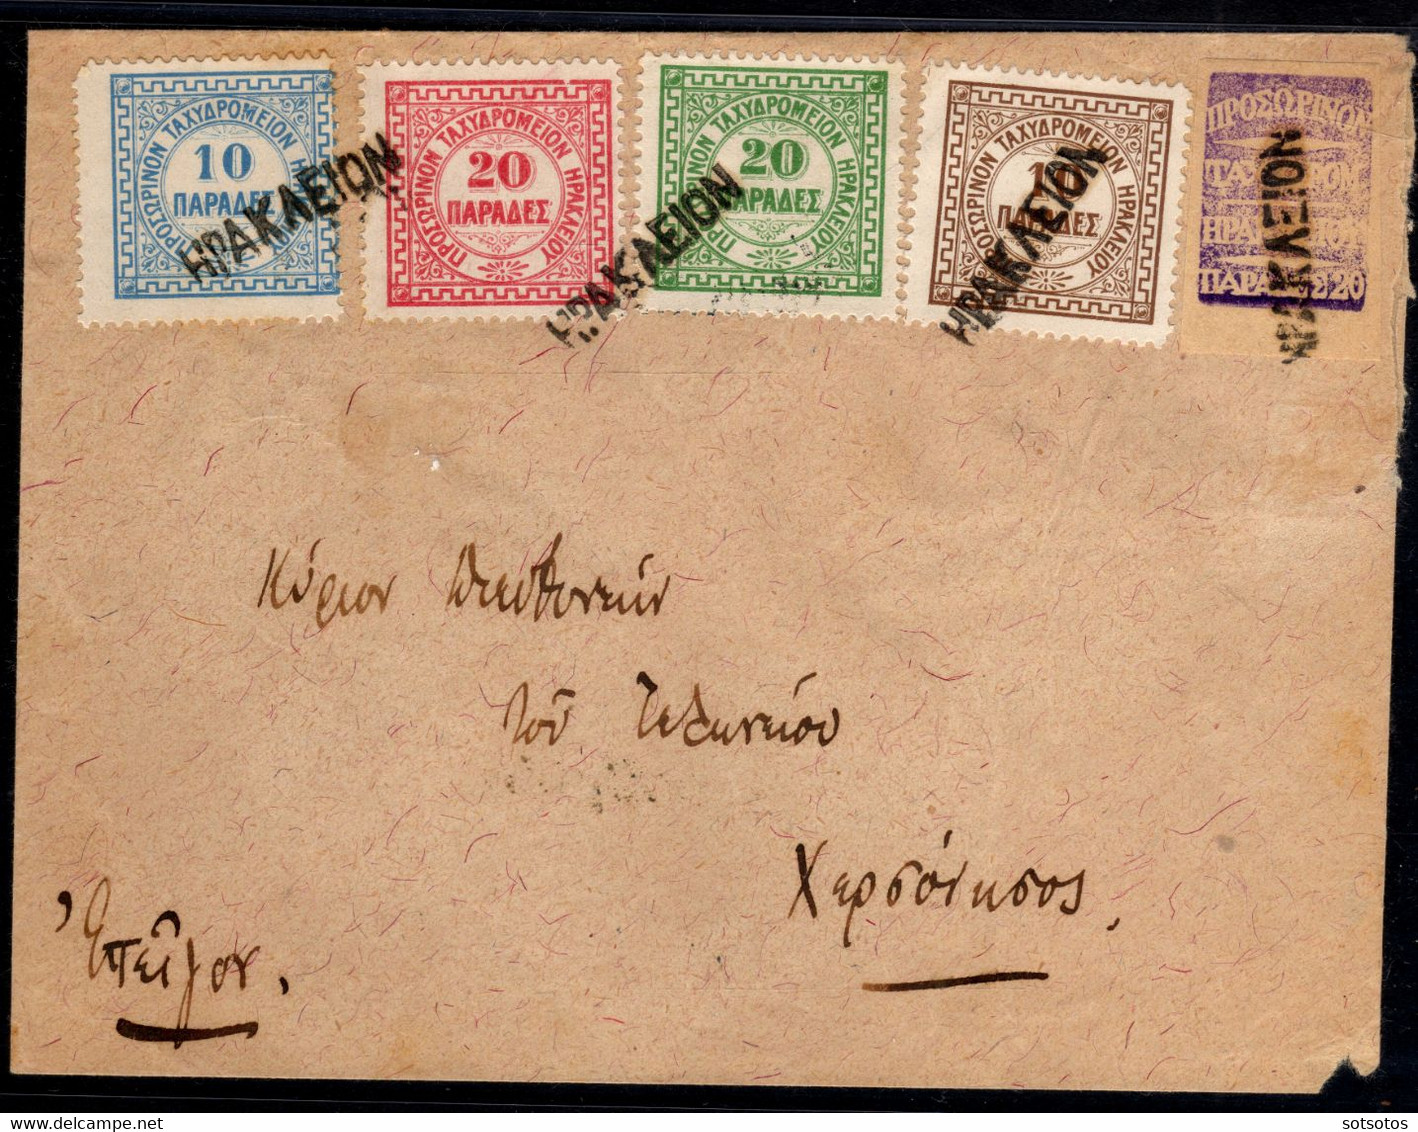 CRETE 1898: The Rarest Cover Of Cretan Post Offices, Bearing All 5 Stamps Of The British Post Office In Crete - Crete